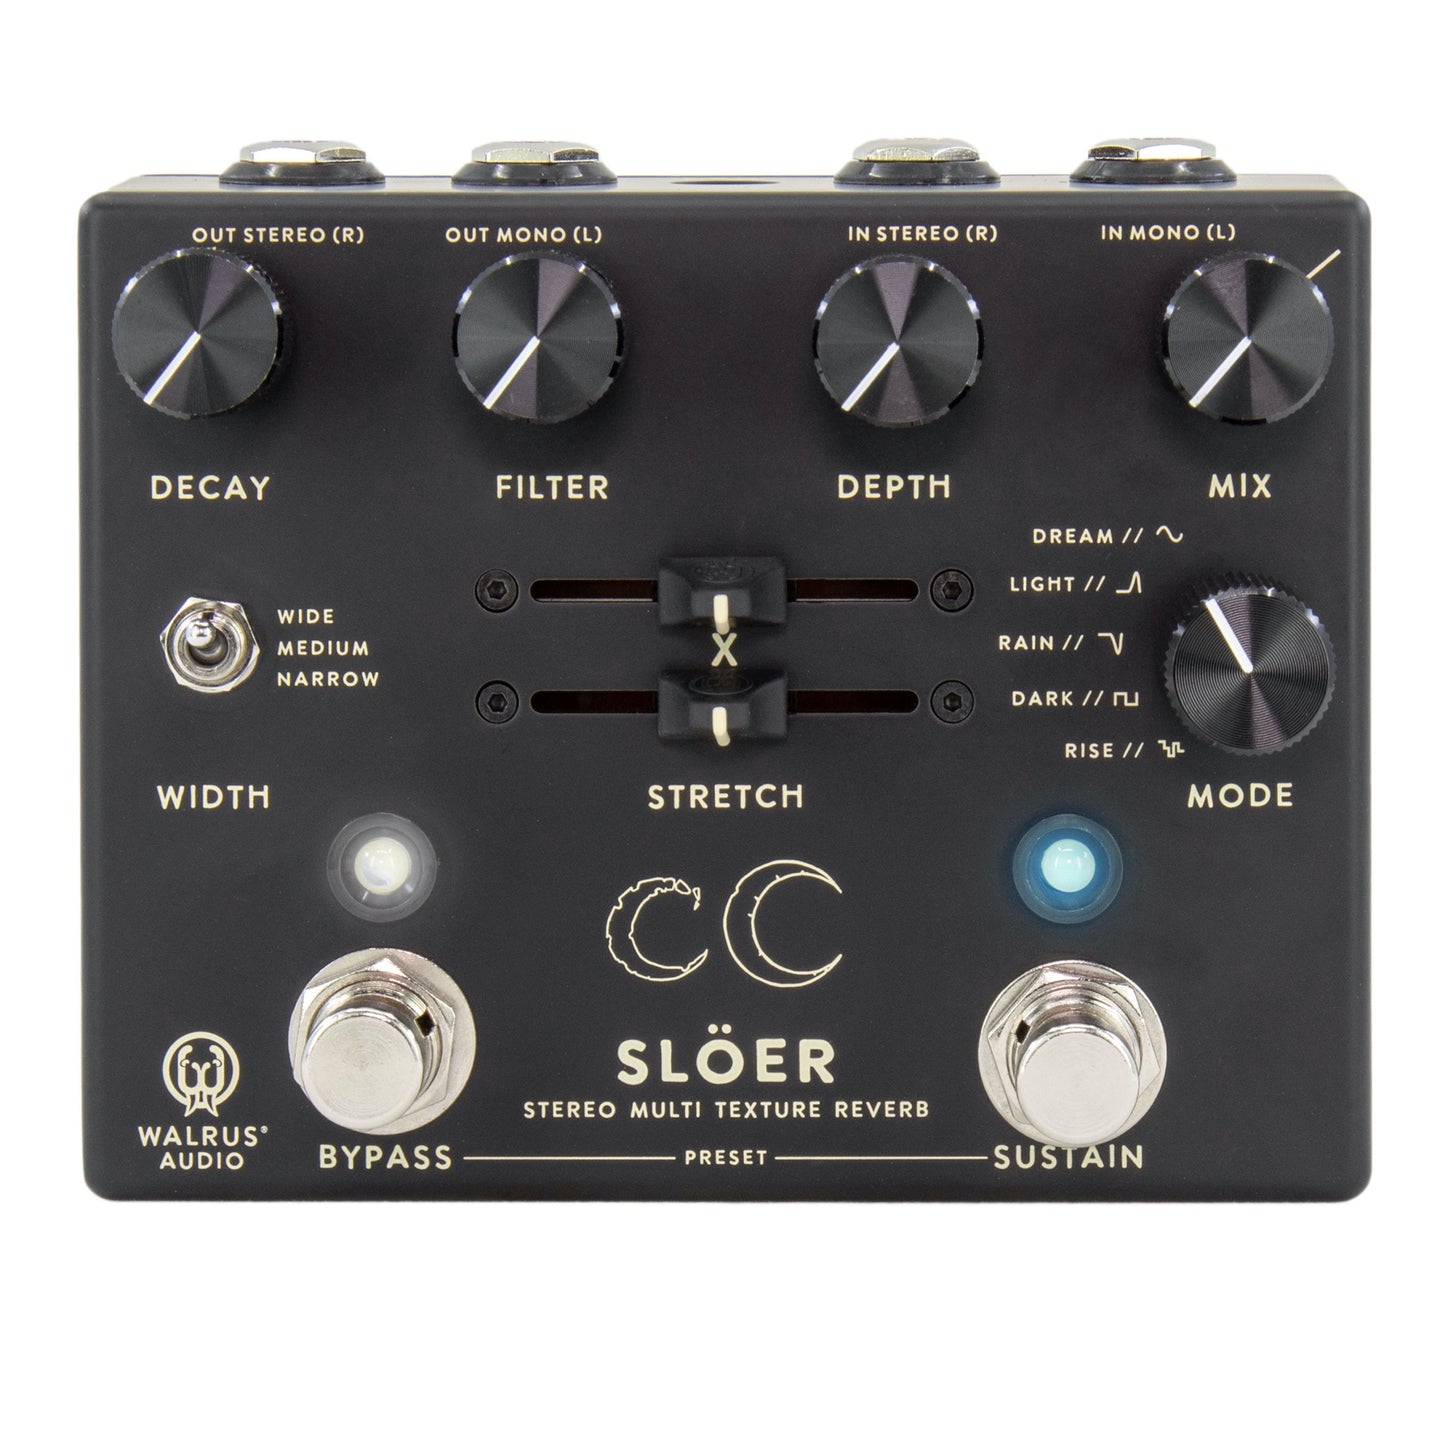 Walrus Audio Slöer Stereo Ambient Reverb Pedal, Black